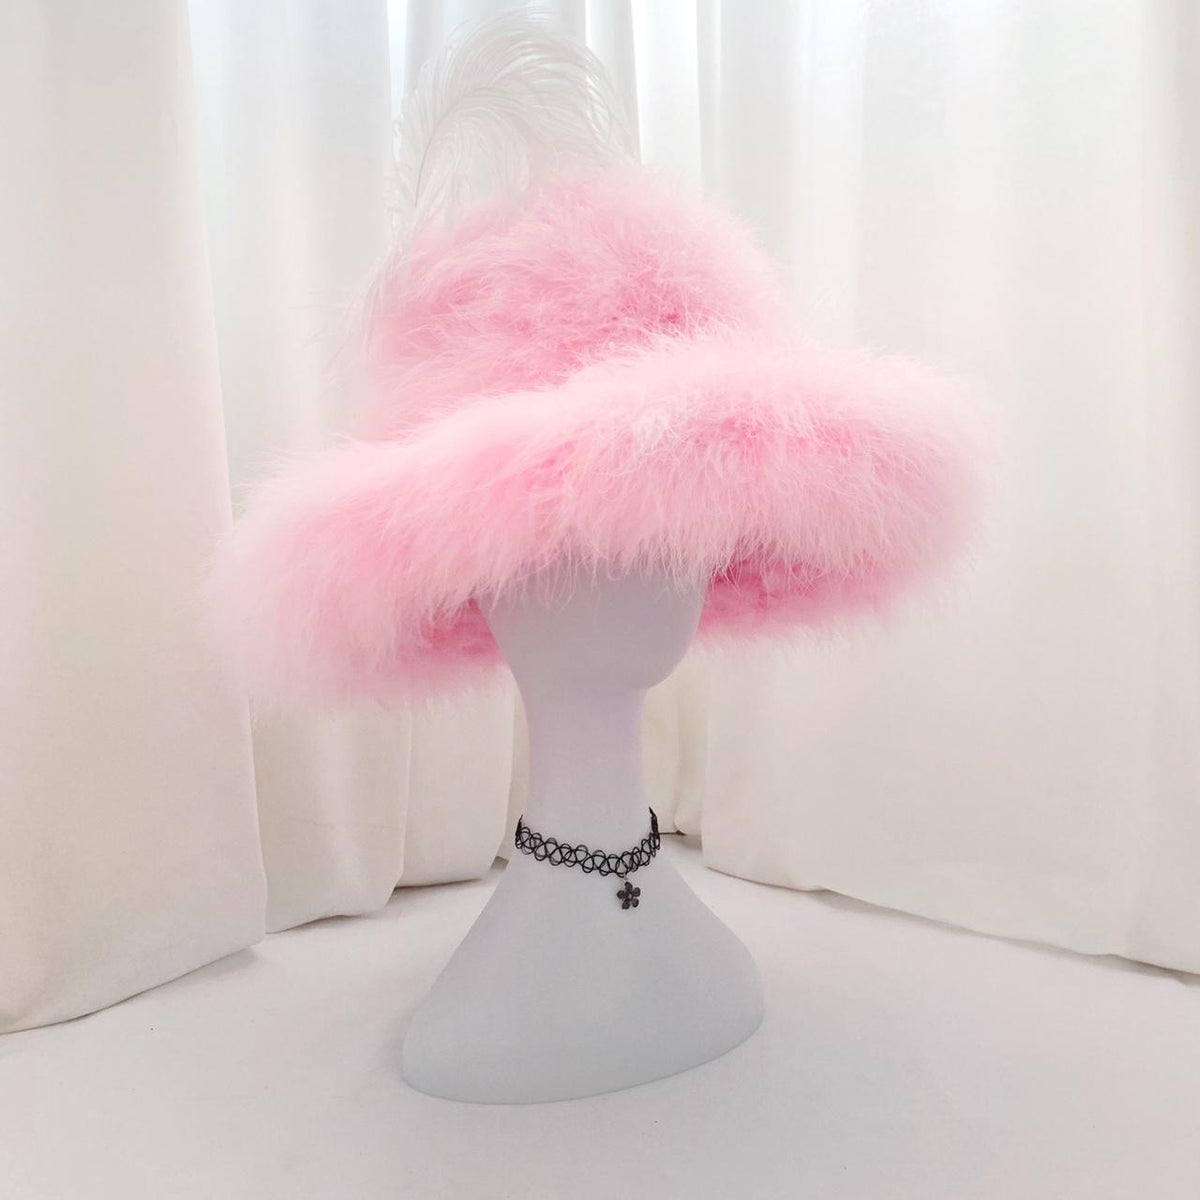 Handmade Large Pink Feather Hat - 90s Costume - Pamela Anderson Costume